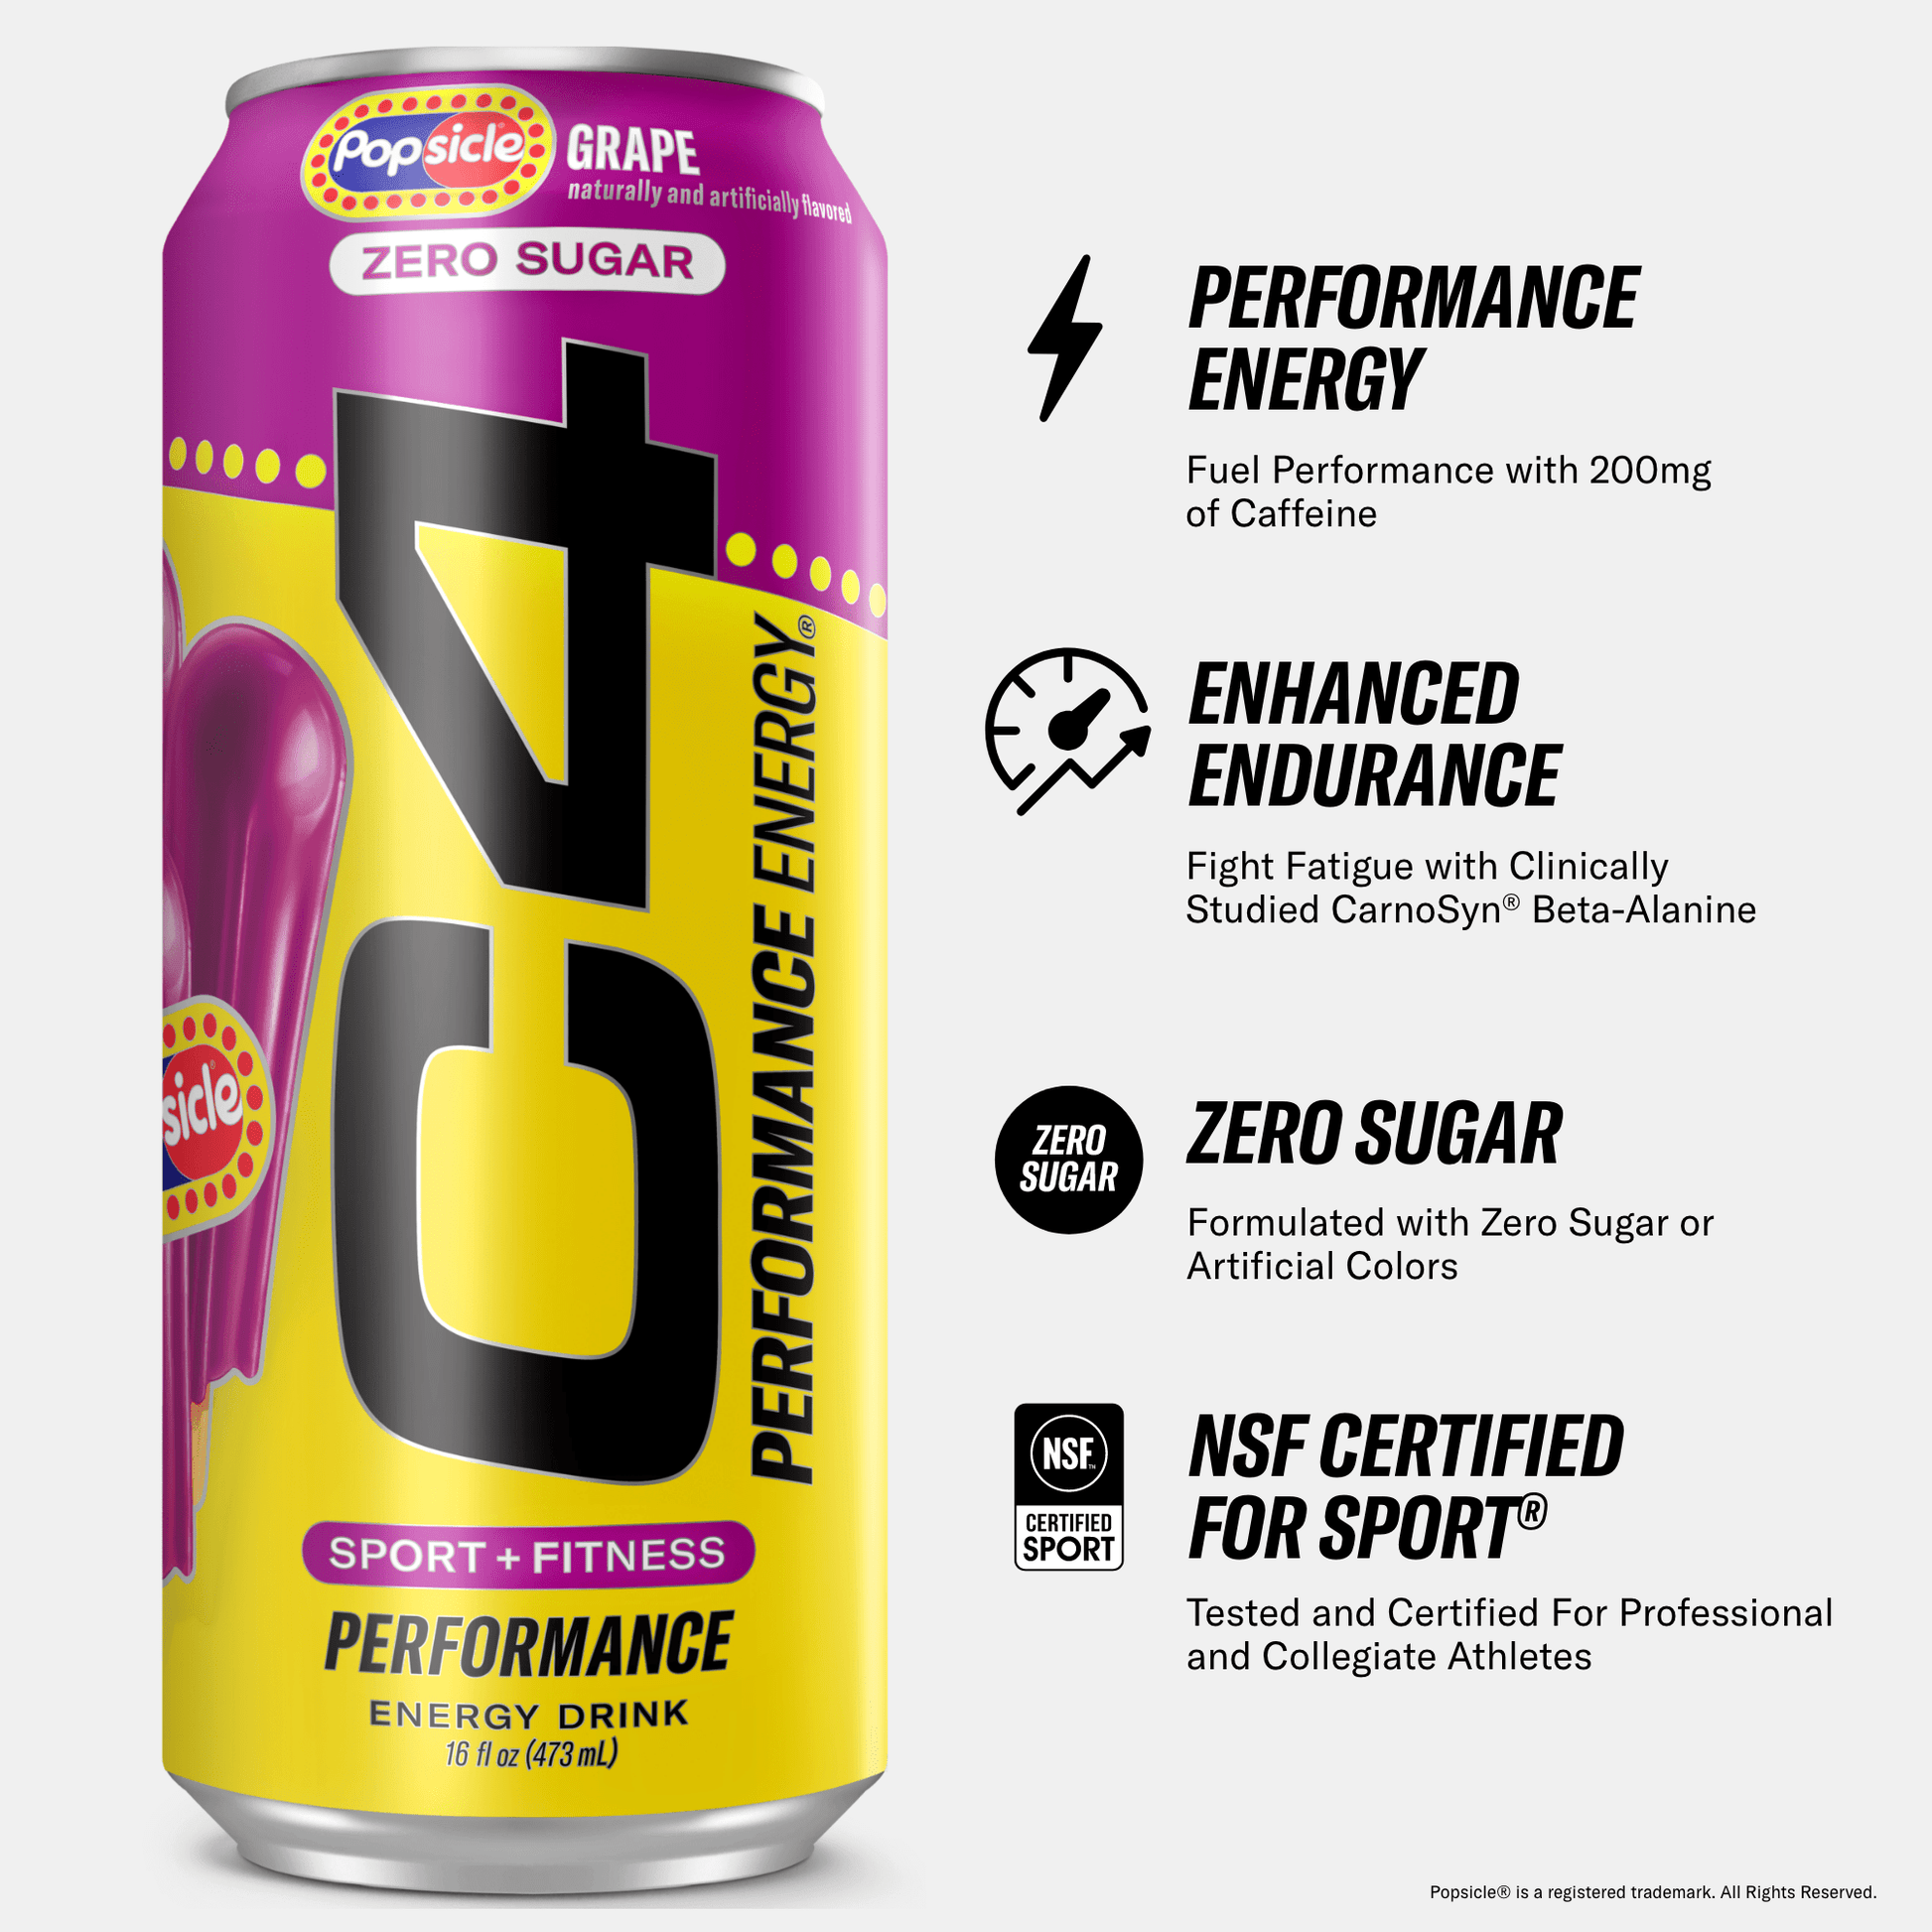 C4 Energy Collaborates With Wounded Warrior Project on New Product Launches  